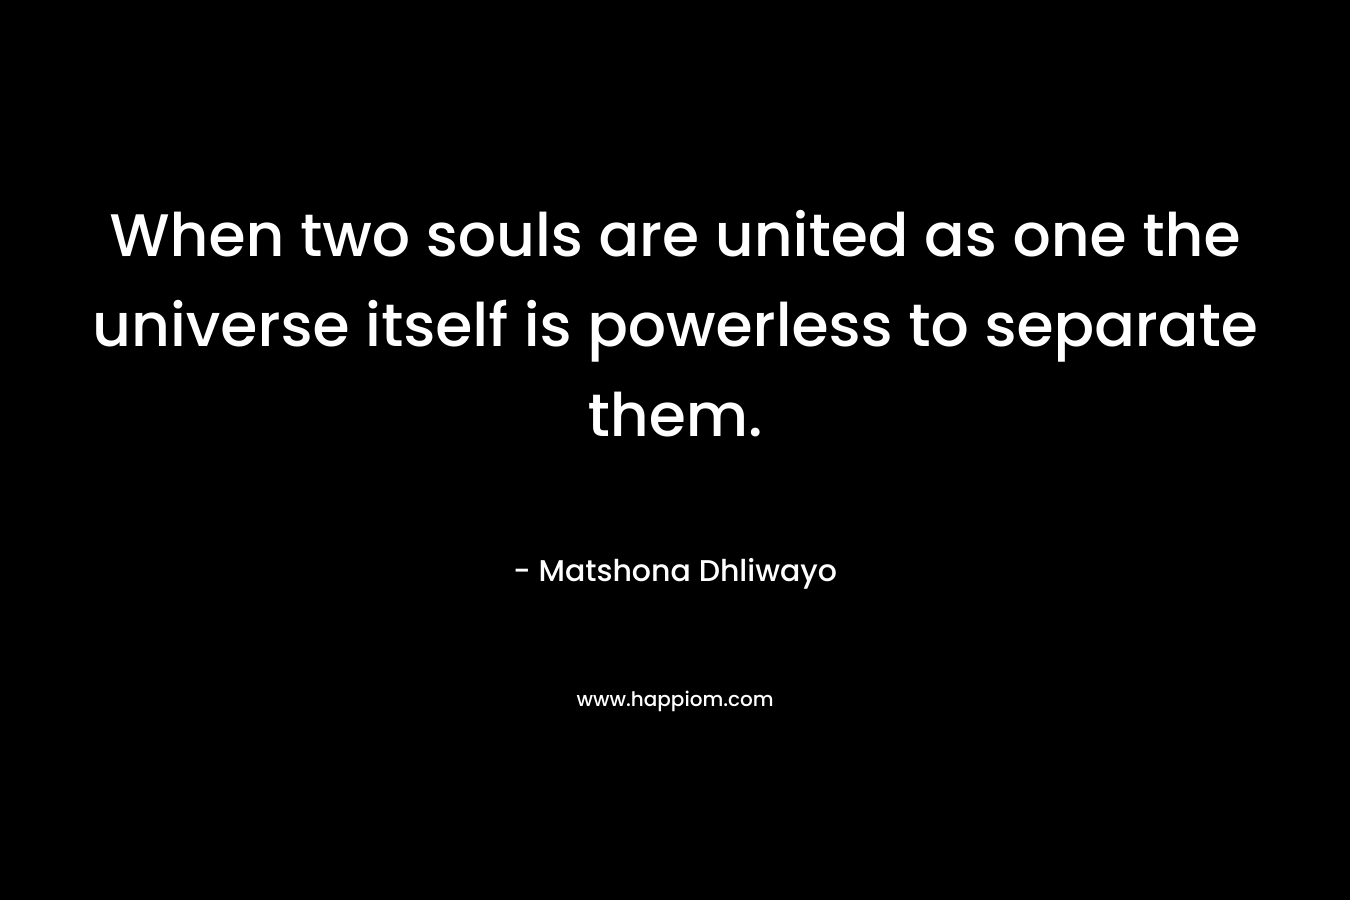 When two souls are united as one the universe itself is powerless to separate them.